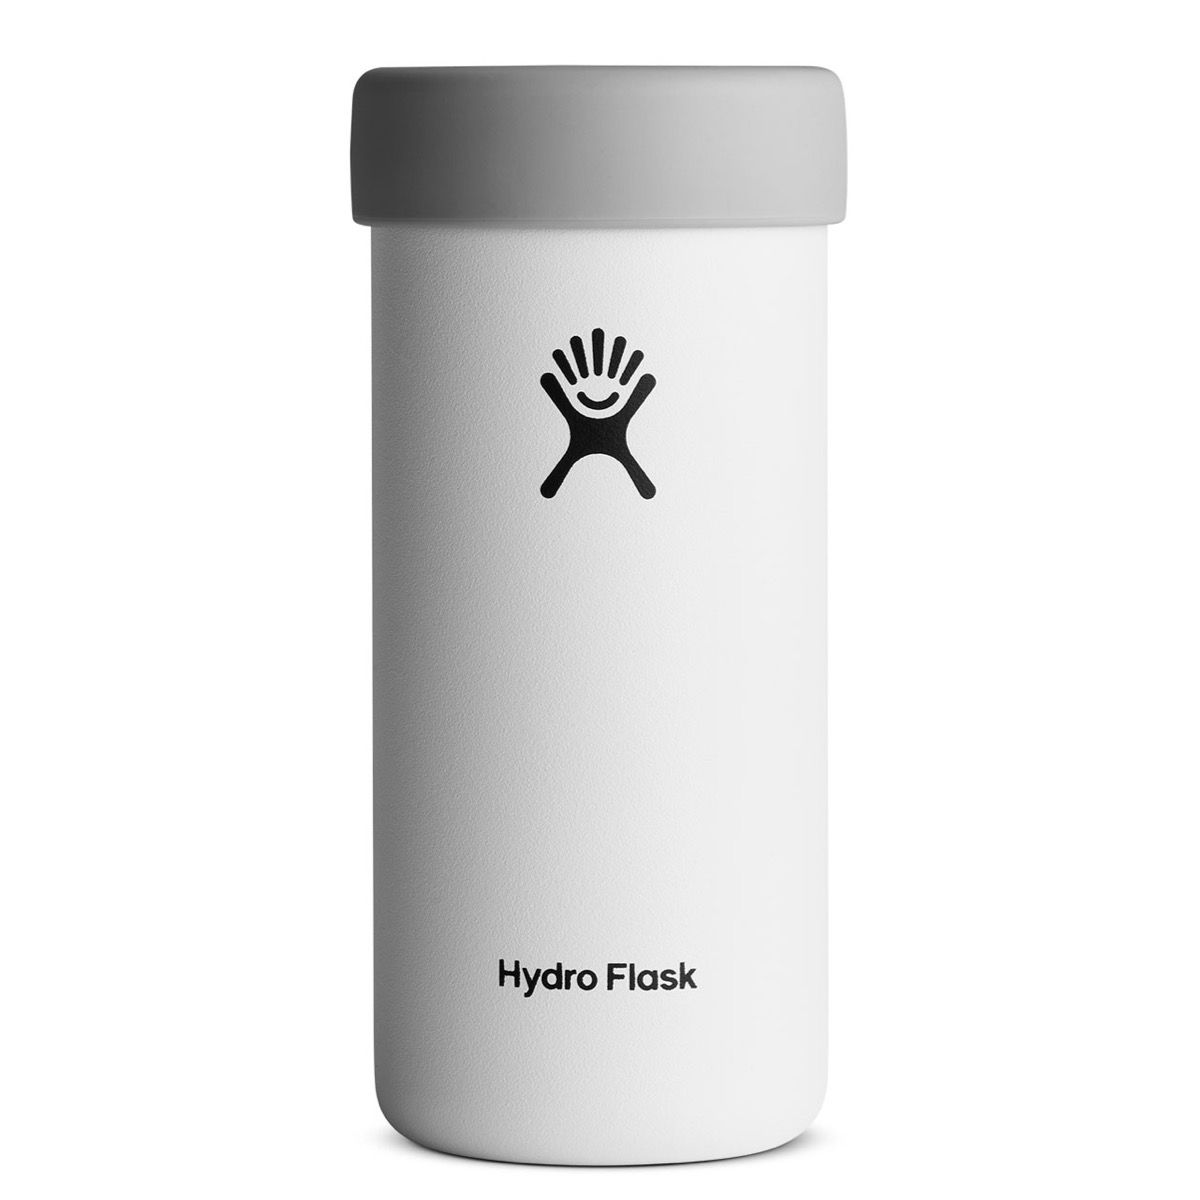 Hydro Flask 16 oz Snapper Red Wide Mouth Screw on Lid W16BCX306 Coffee  Tumbler